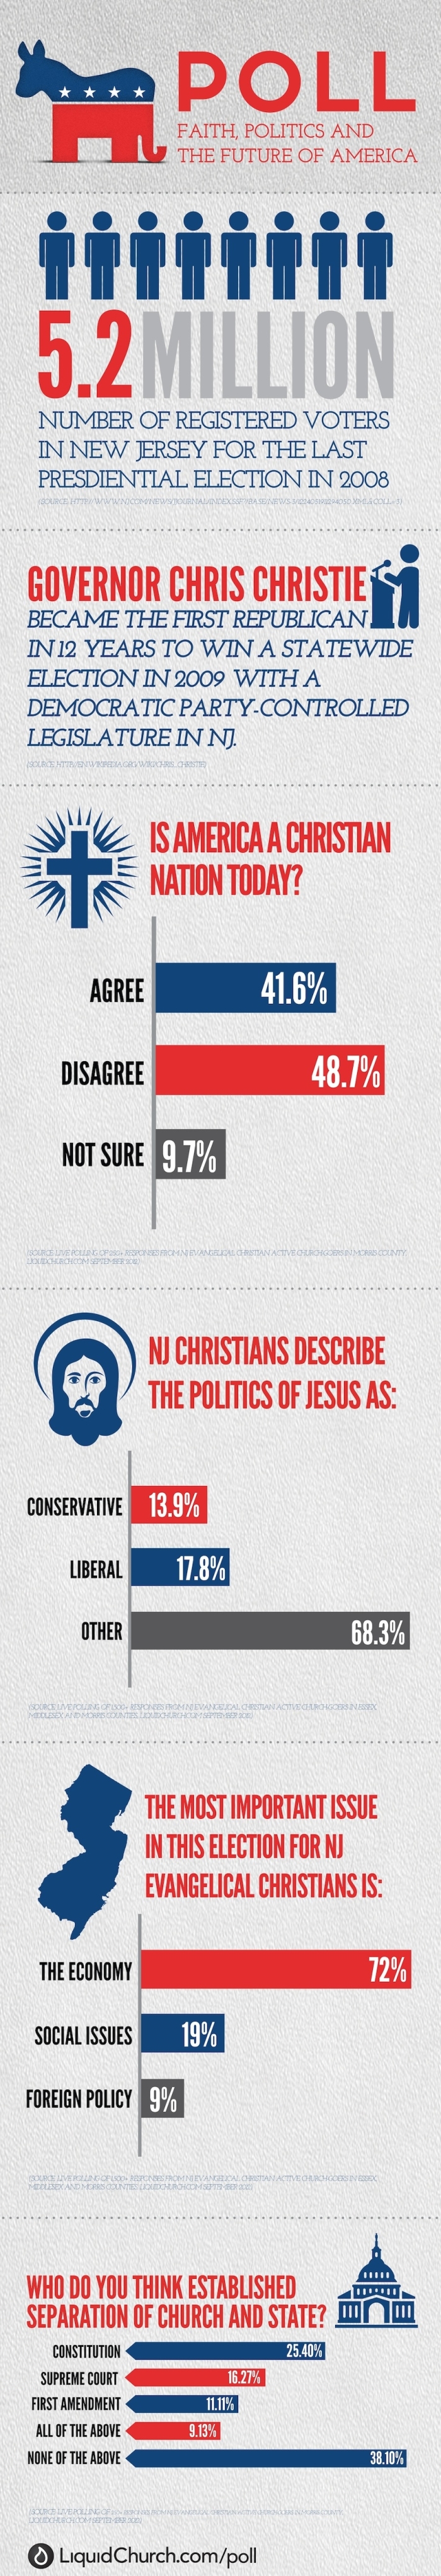 This infographic displays the poll results from week one of Liquid Church's series, 'Poll: Faith, Politics and the Future of America.'